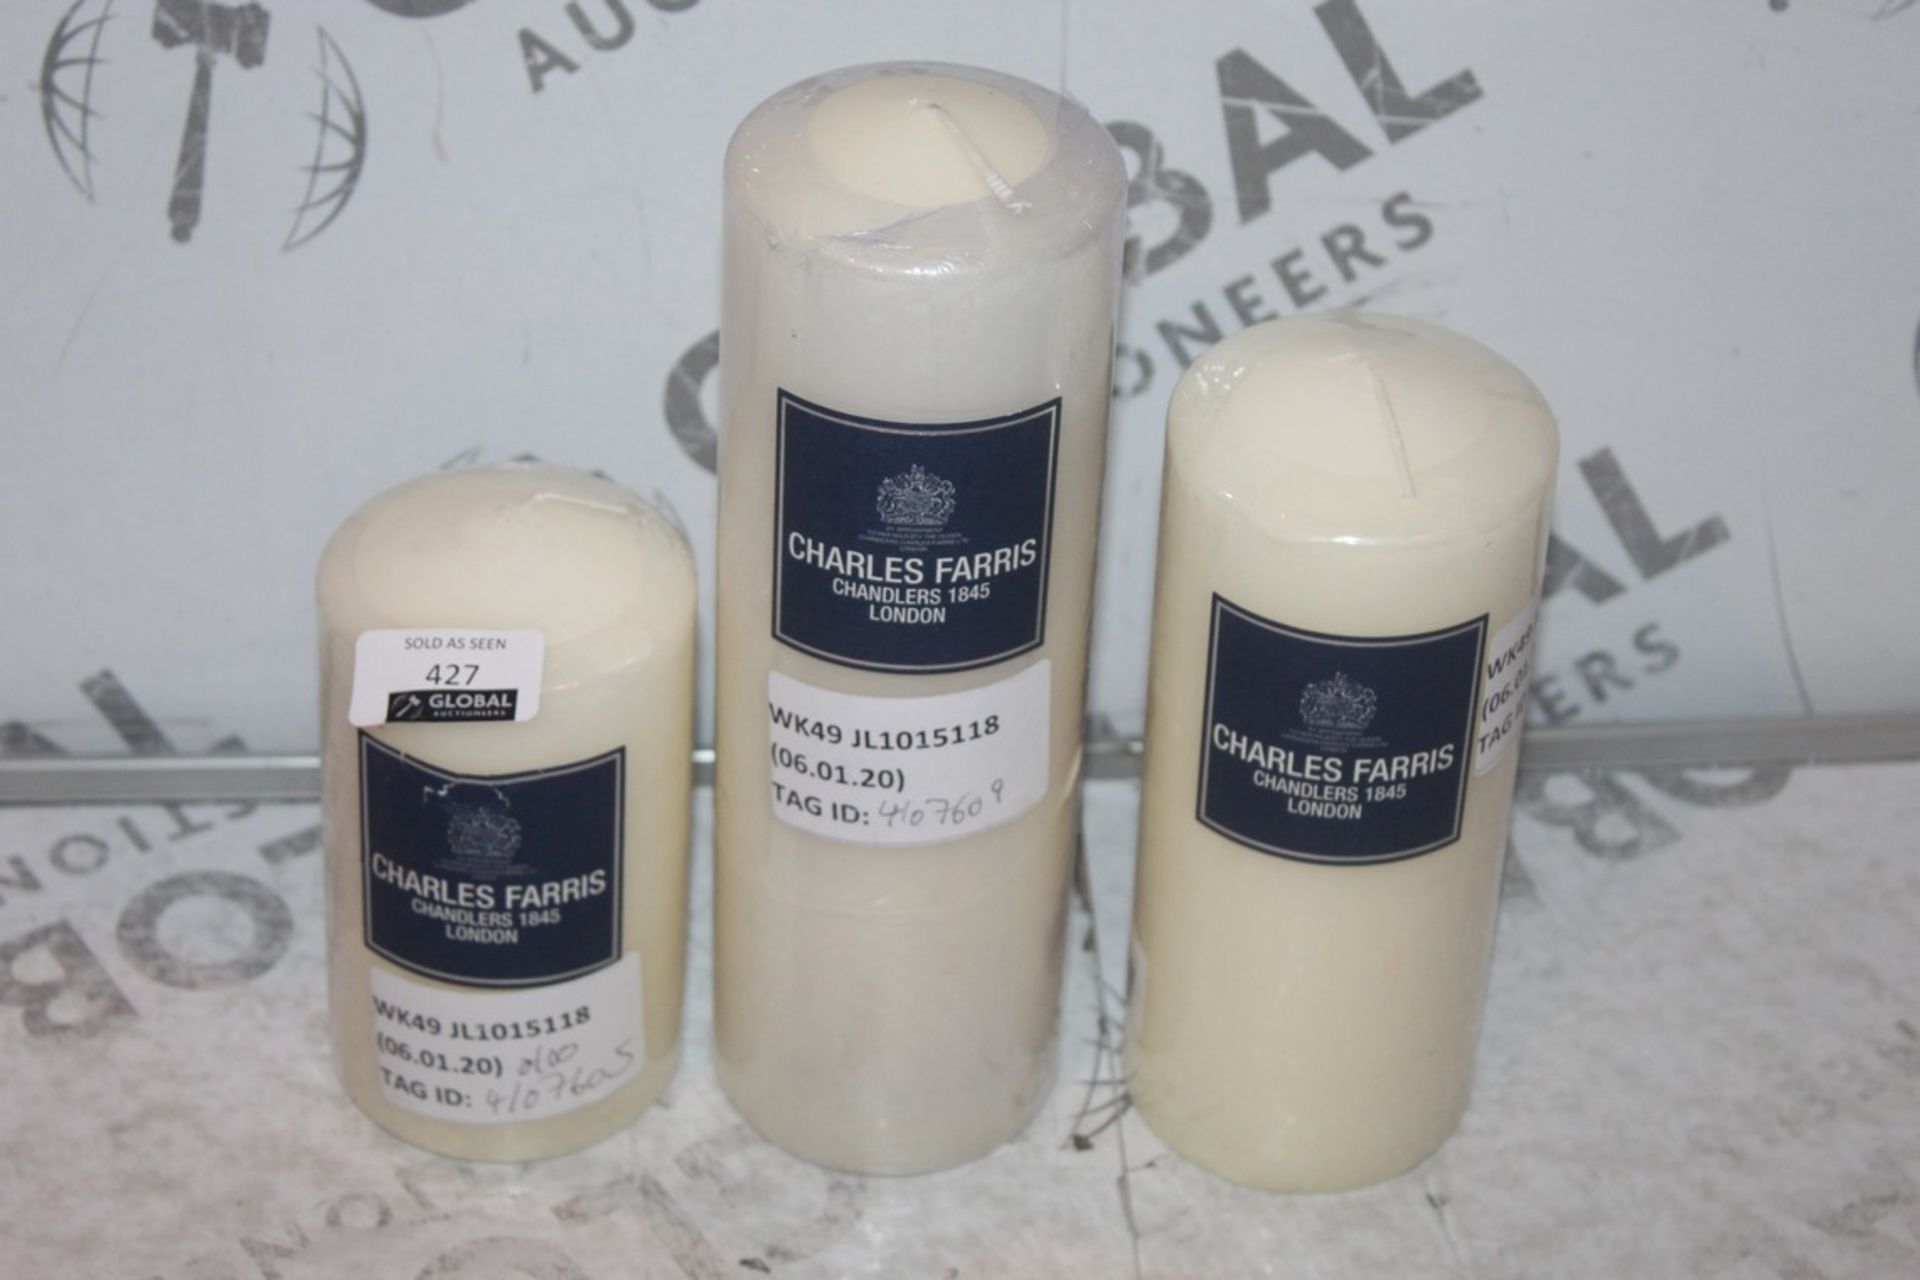 Lot to Contain 4 Assorted Small Medium and Large Pillar Candles and a Pack of 10 Dining Candles